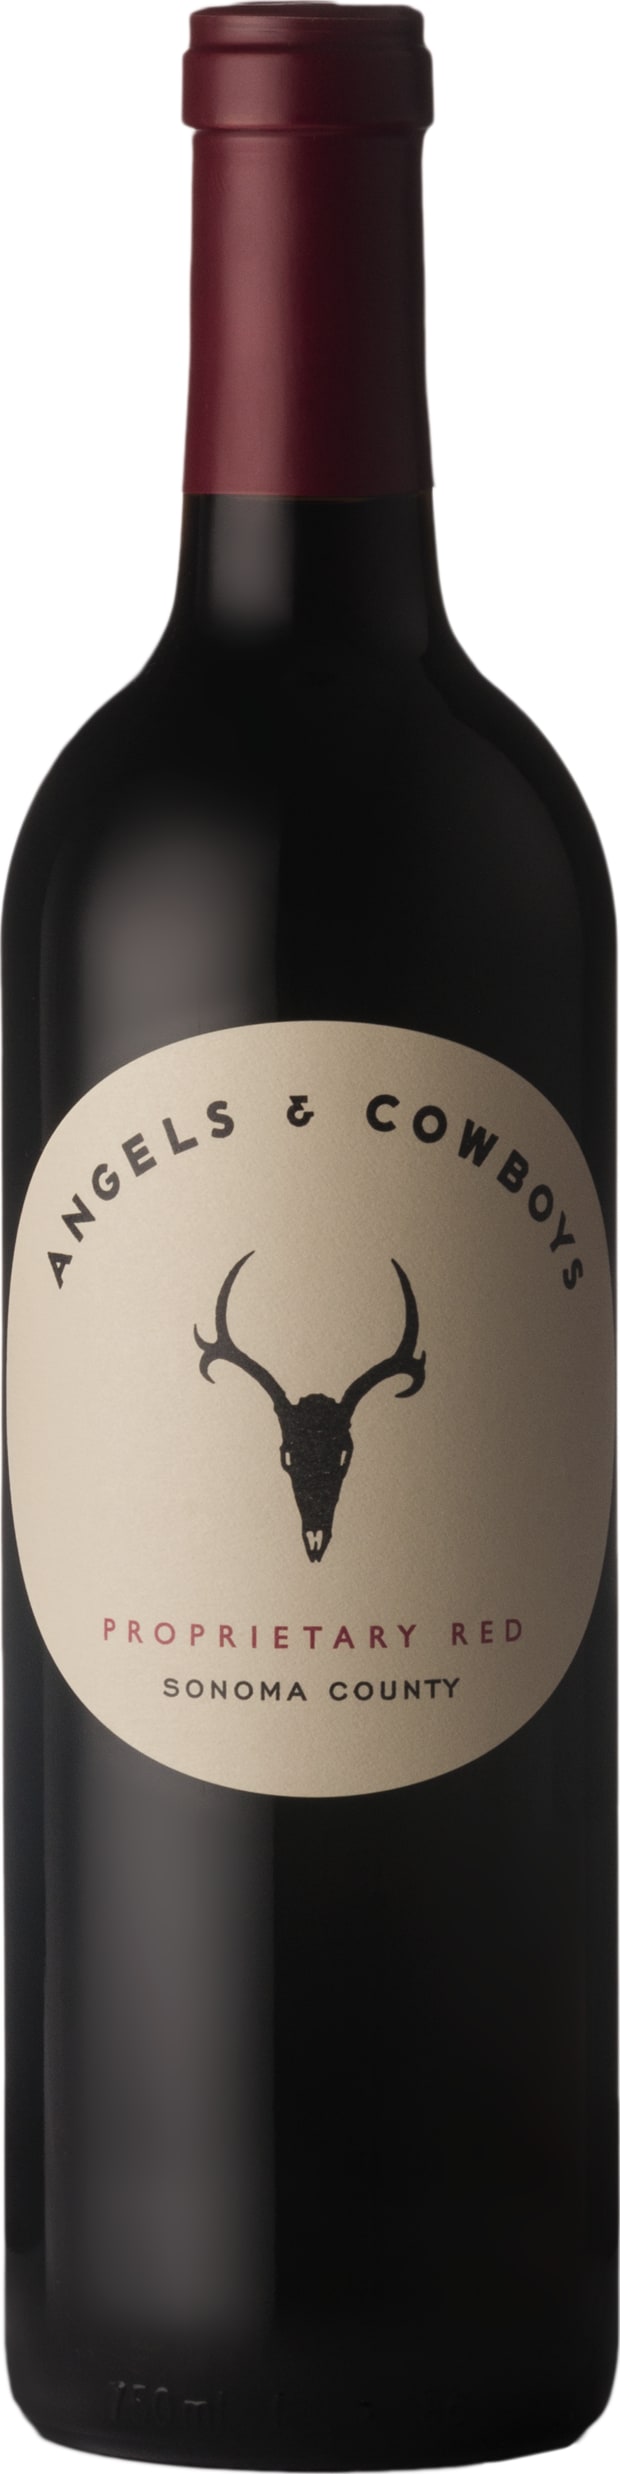 Angels and Cowboys Proprietary Red 2021 75cl - Buy Angels and Cowboys Wines from GREAT WINES DIRECT wine shop